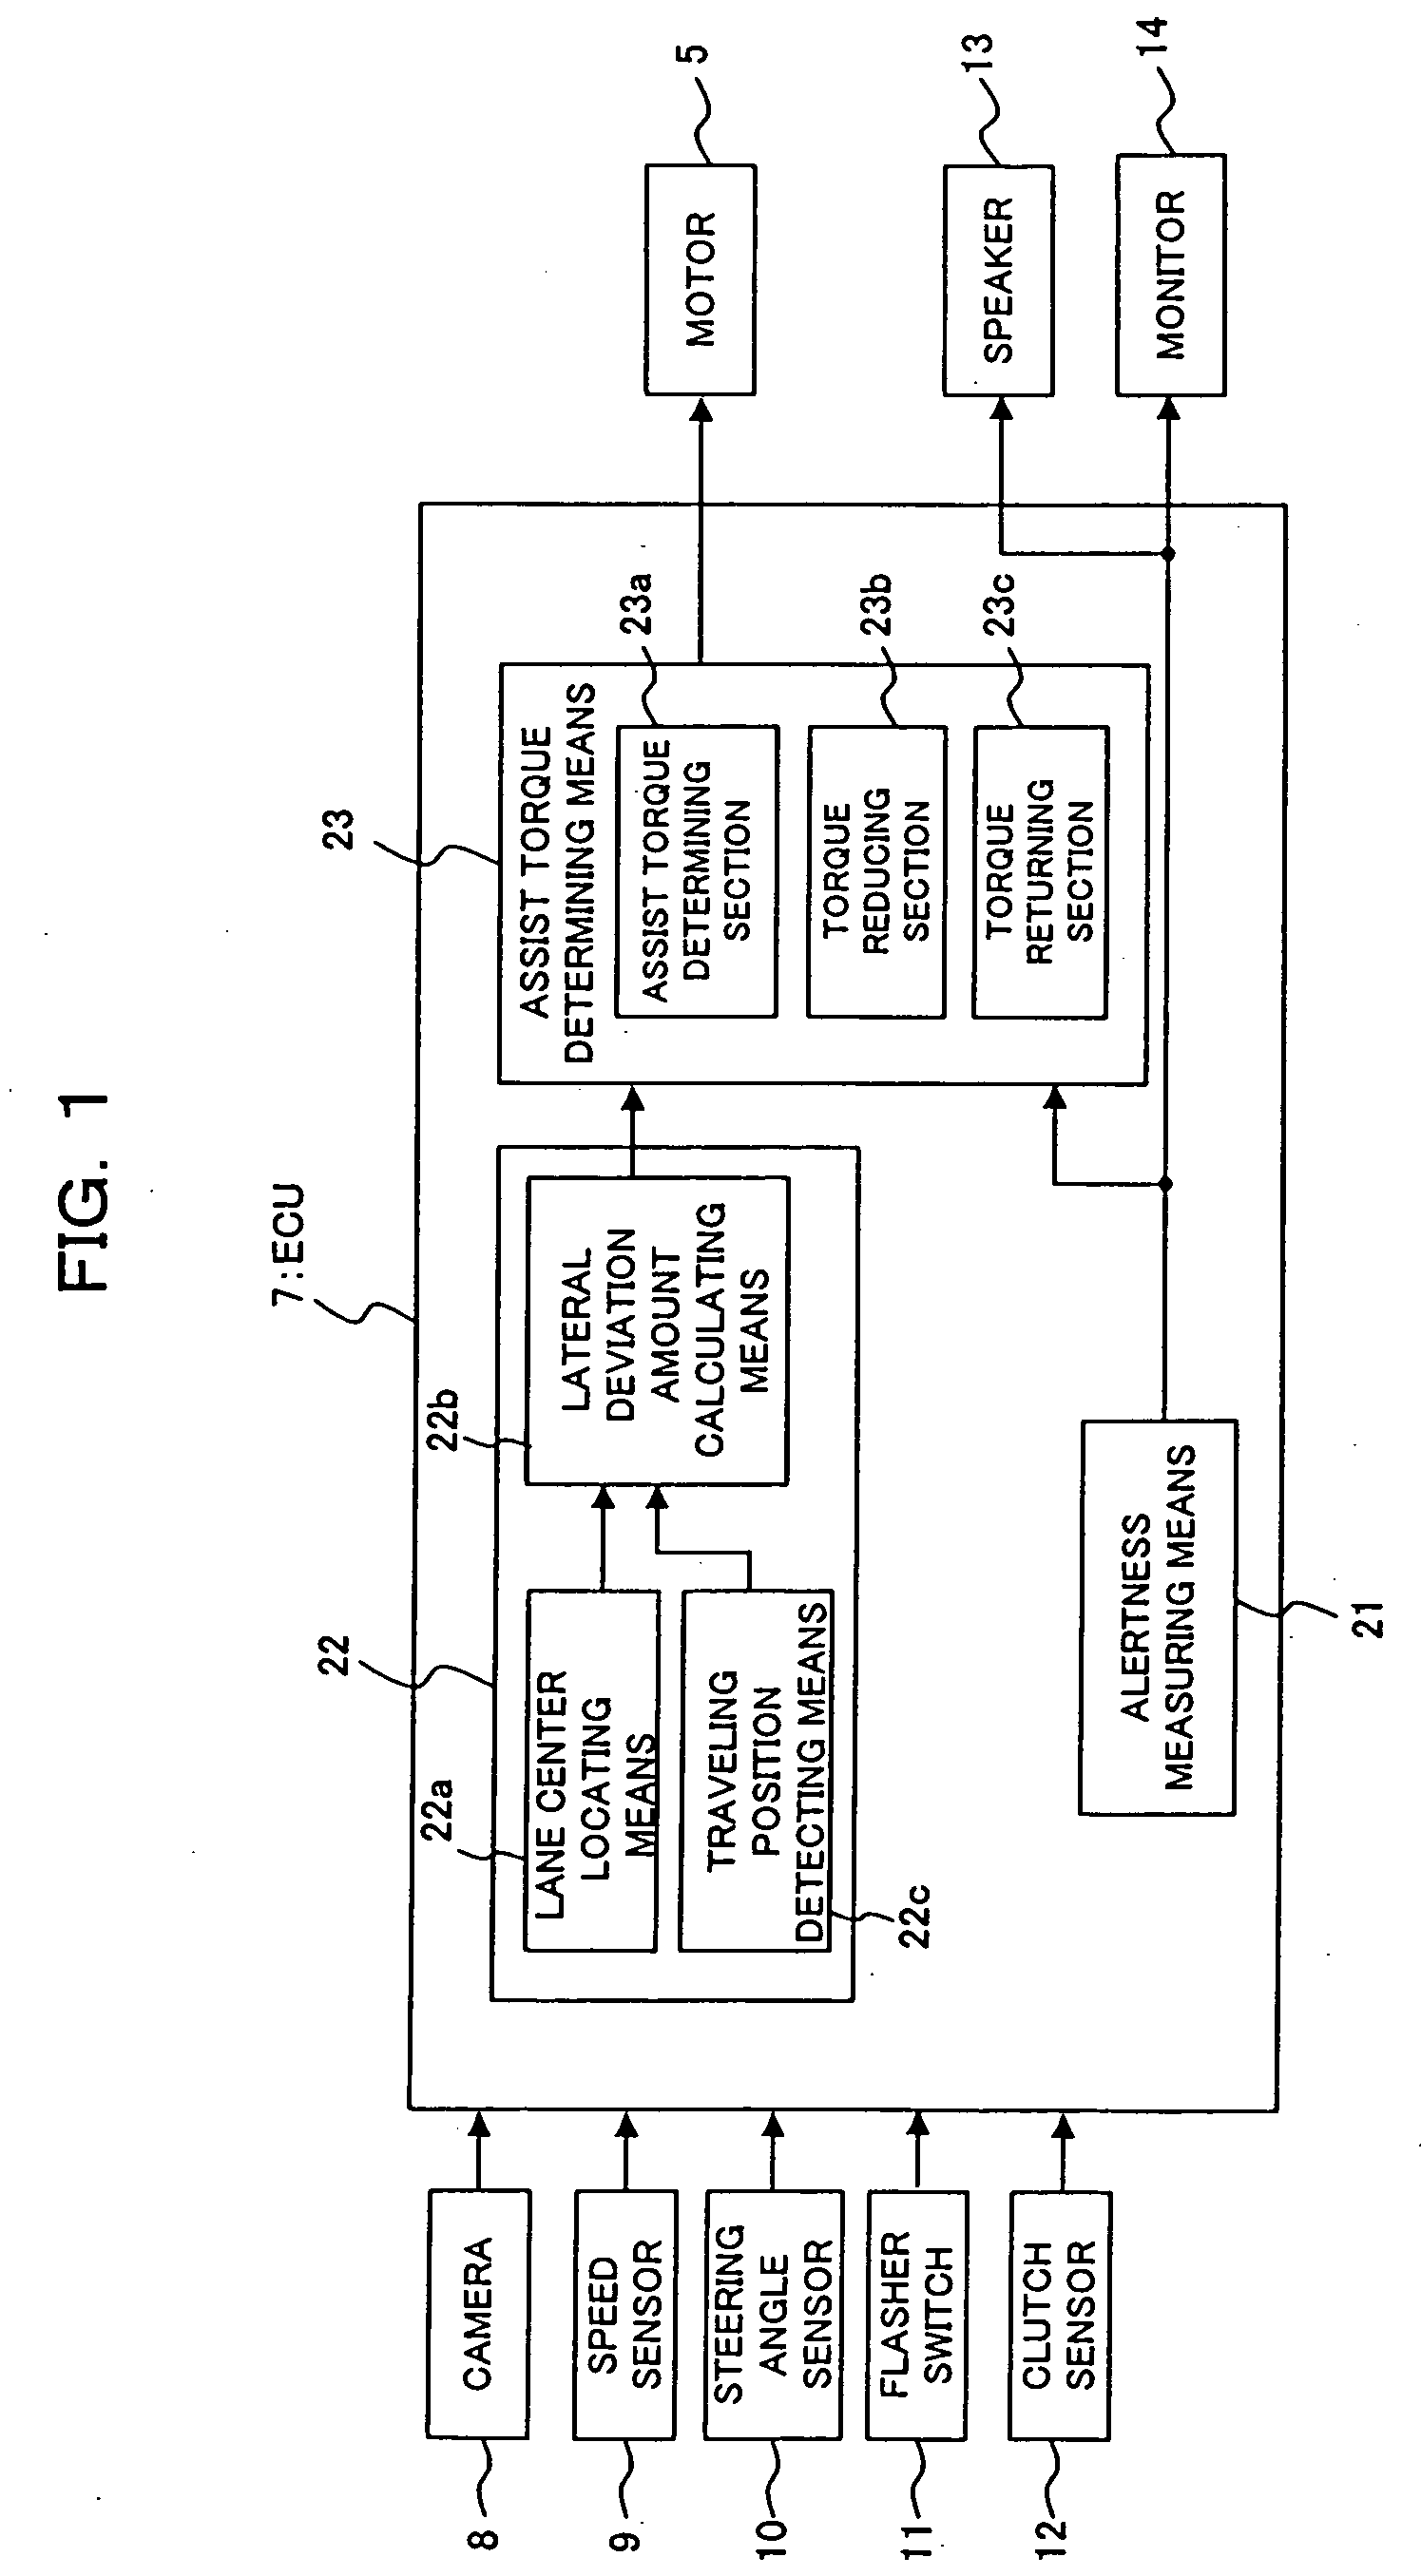 Lane keeping assistant apparatus